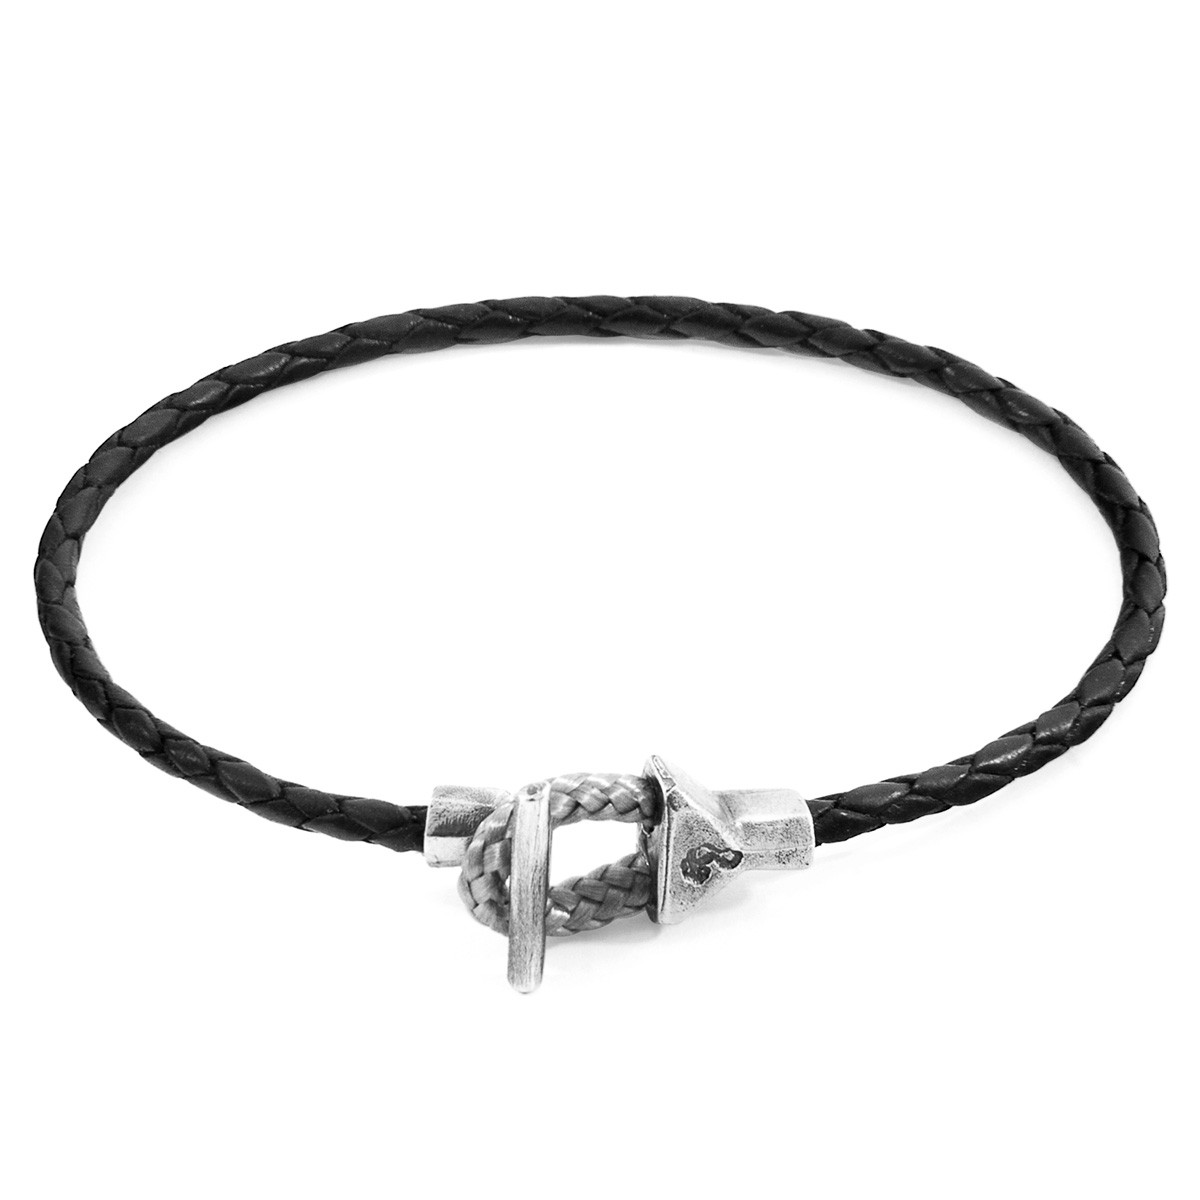 Coal Black Cullen Silver and Braided Leather Bracelet